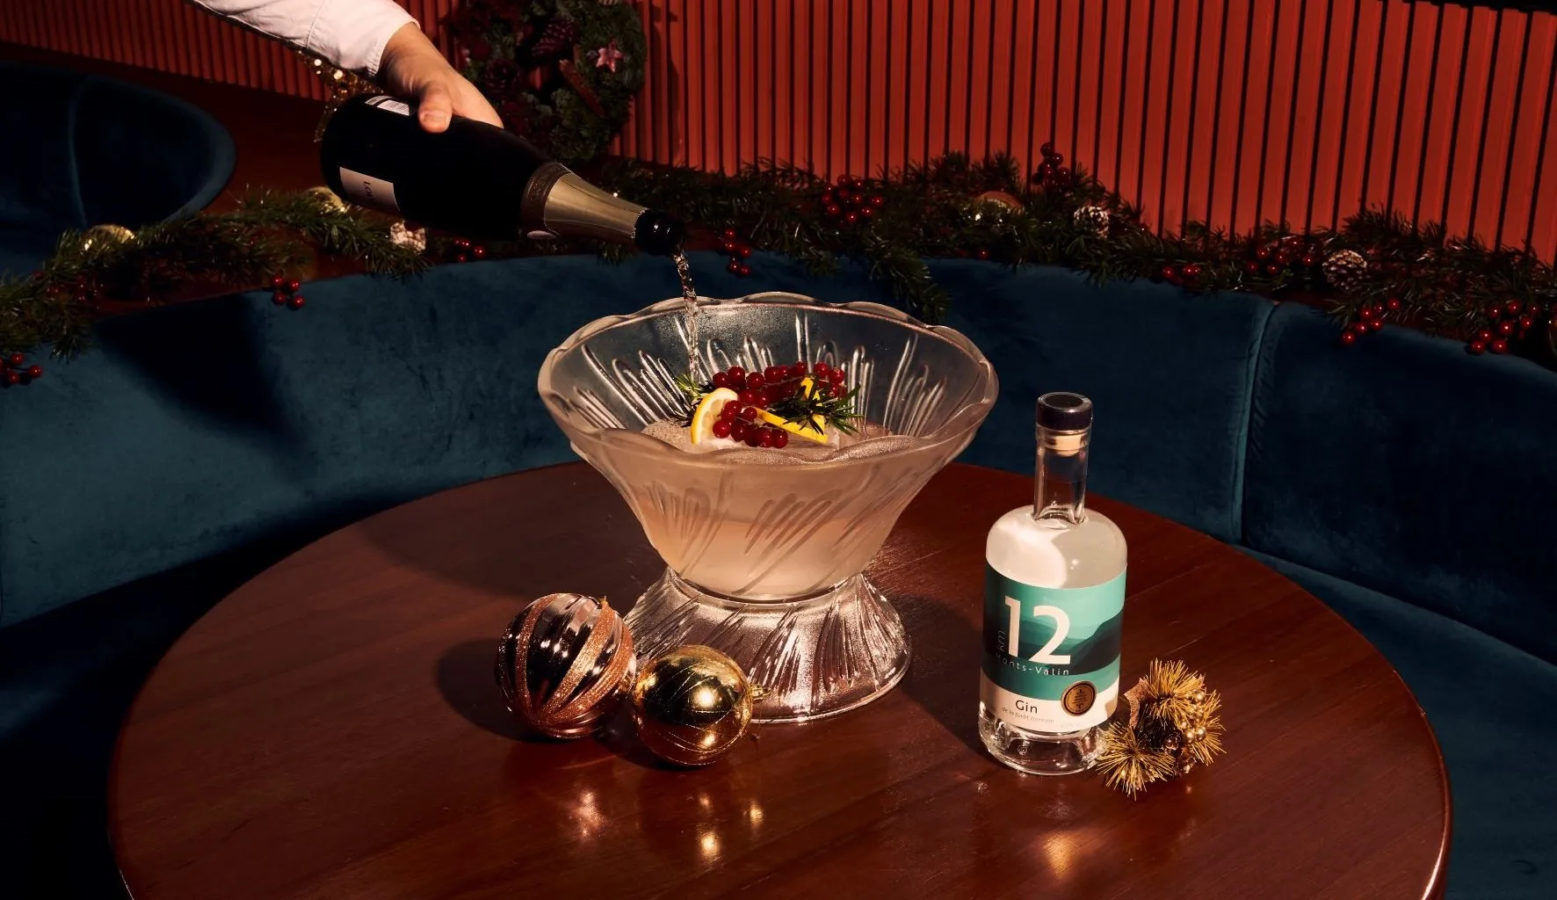 Bowled over: 8 Best bars in Singapore for the best boozy punch bowls